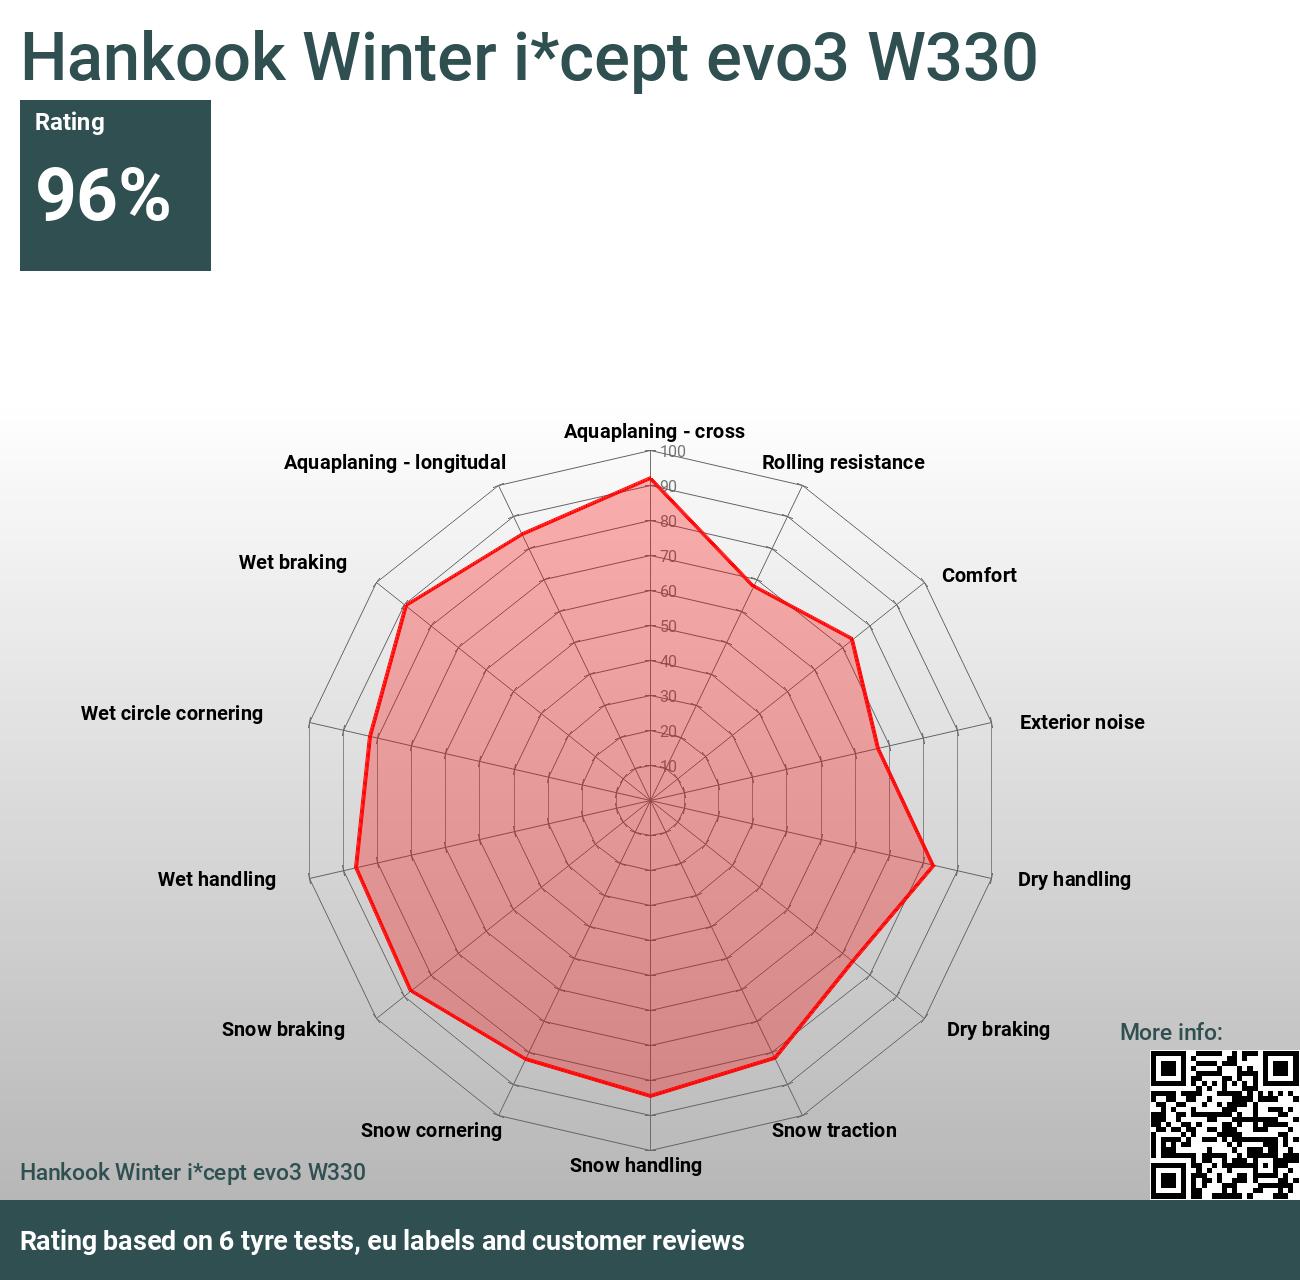 Hankook Winter evo3 and 2024 - tests Reviews i*cept W330